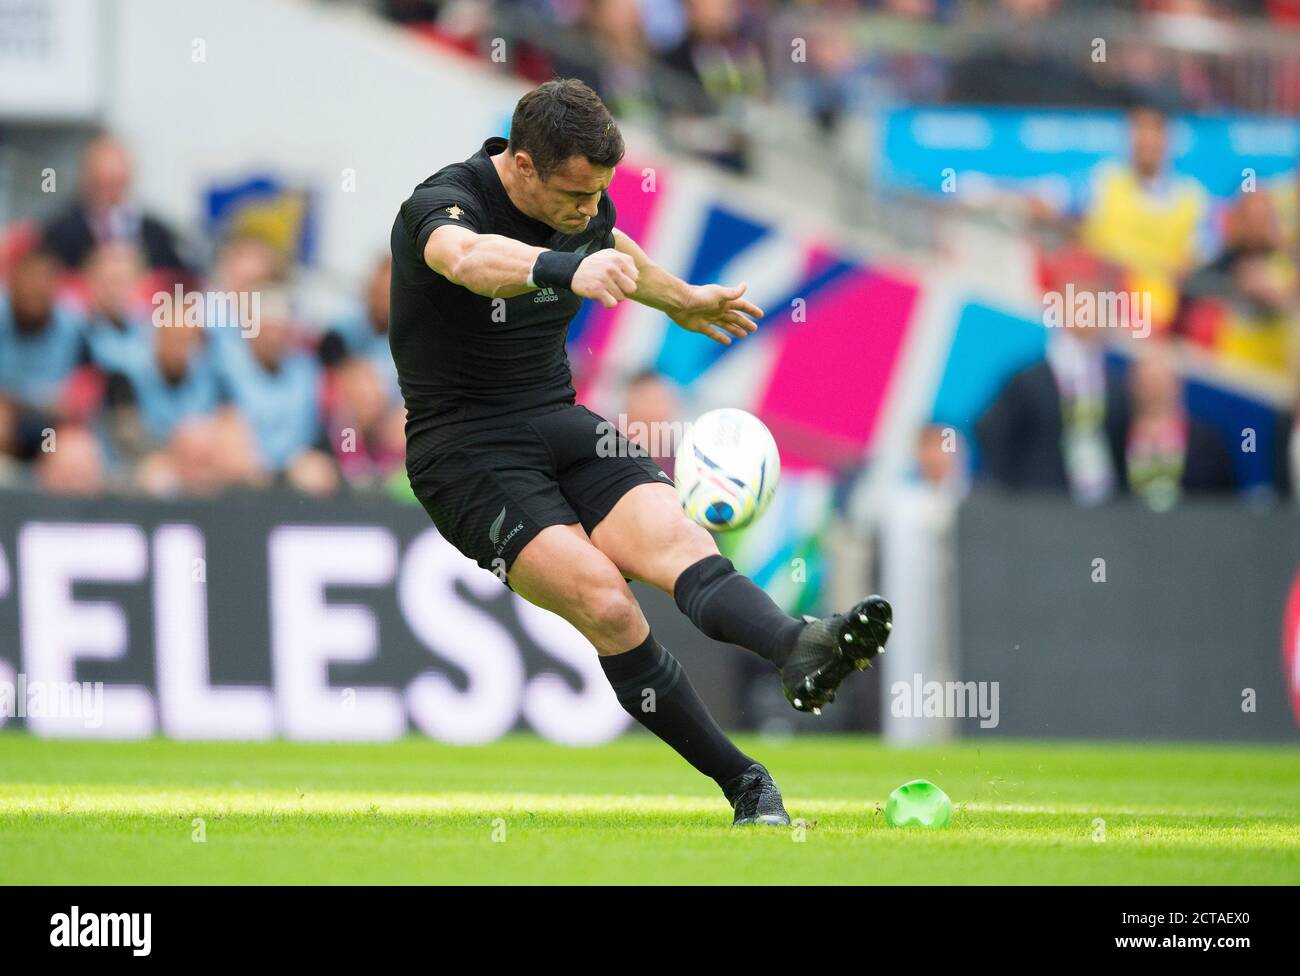 DAN CARTER  New Zealand v Argentina Rugby World Cup 2015   Picture Credit : © MARK PAIN / ALAMY Stock Photo